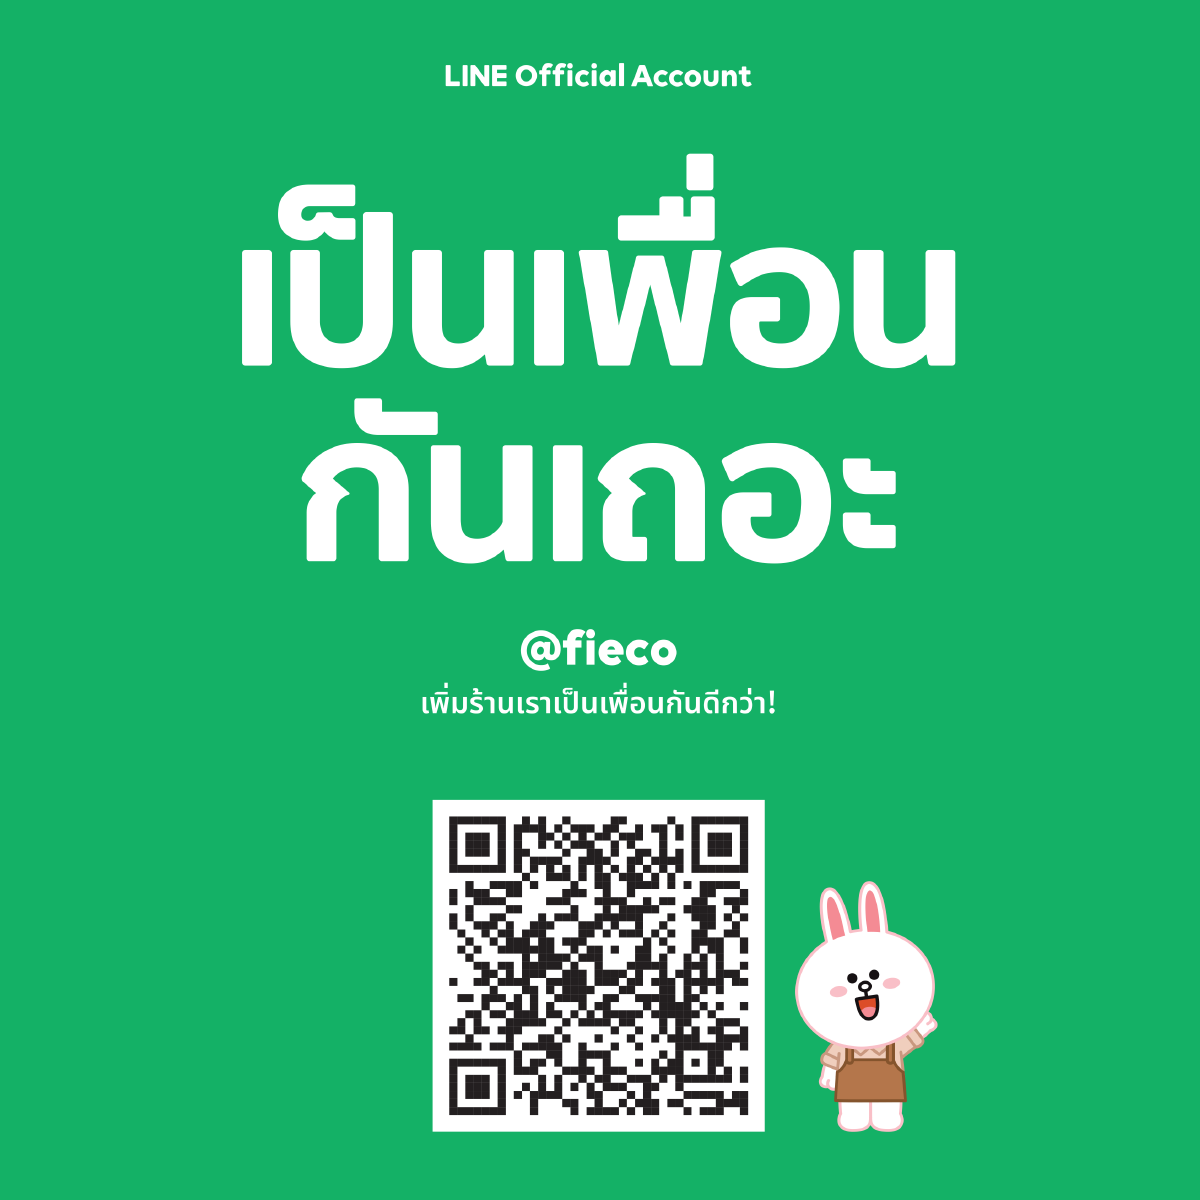 @Line Fieco Official Account